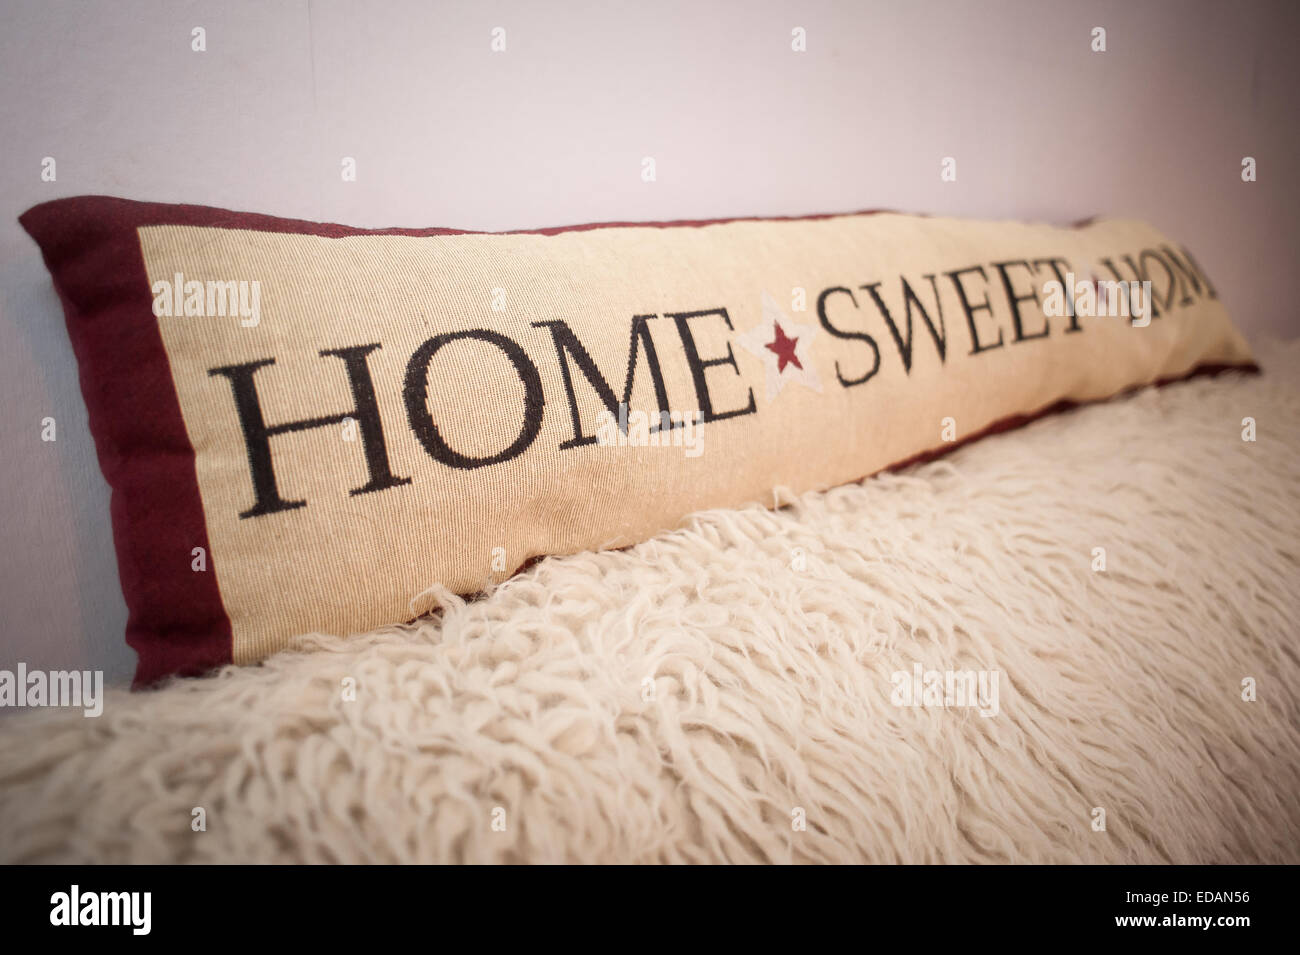 Coussin Home sweet home Banque D'Images